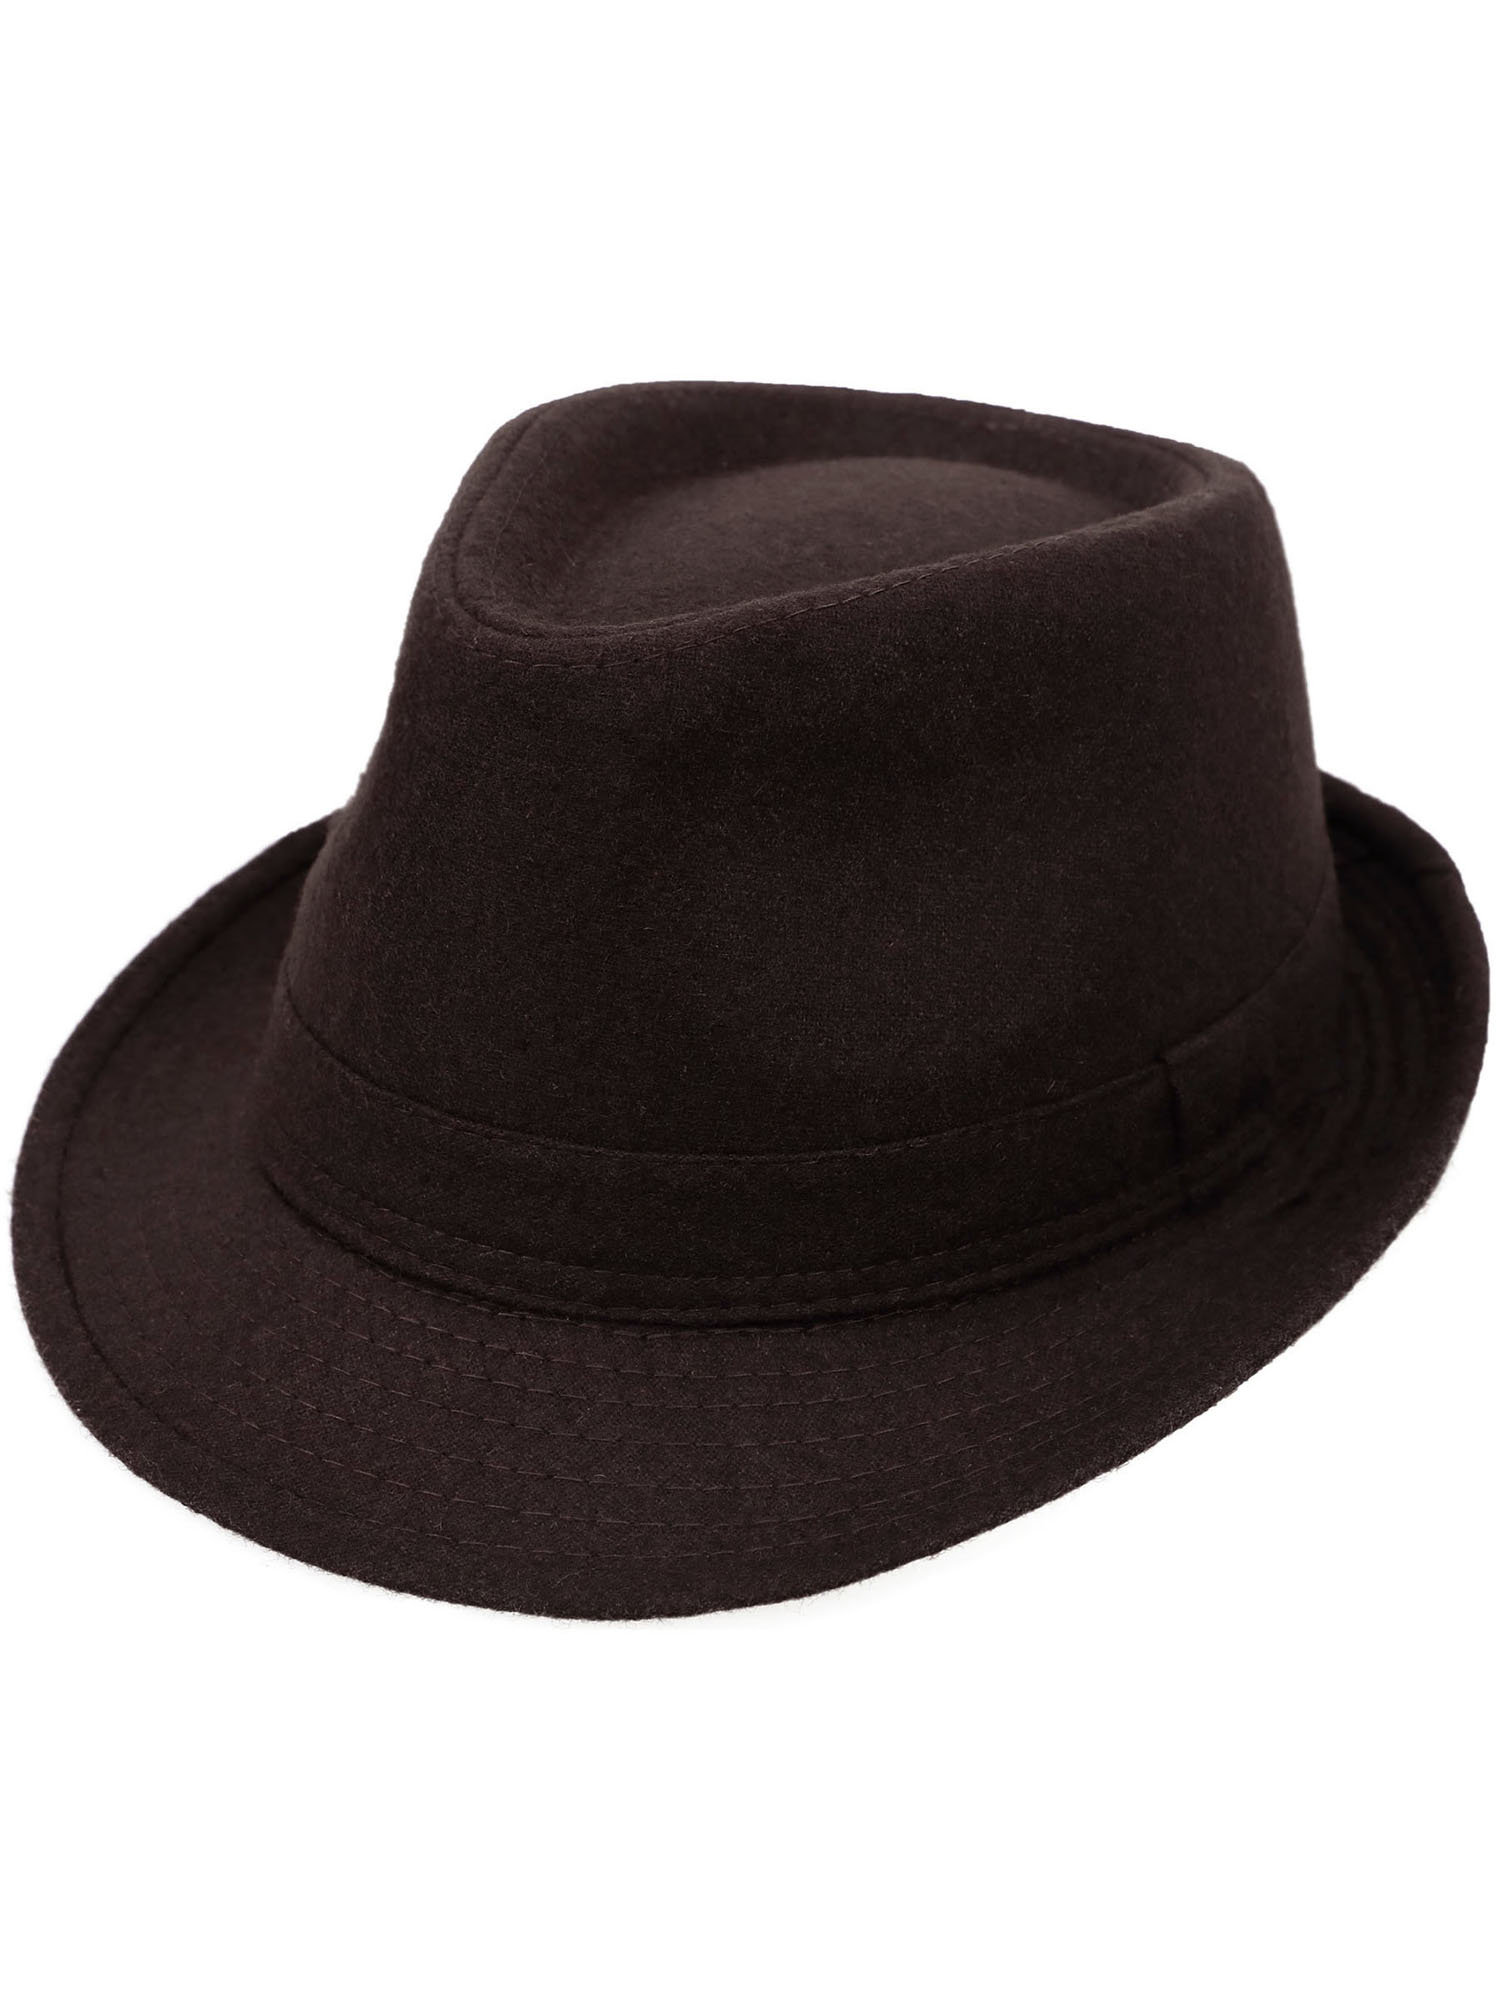 Simplicity Indiana Men's Adult Deluxe Structured Fedora Hat, Brown - image 1 of 4